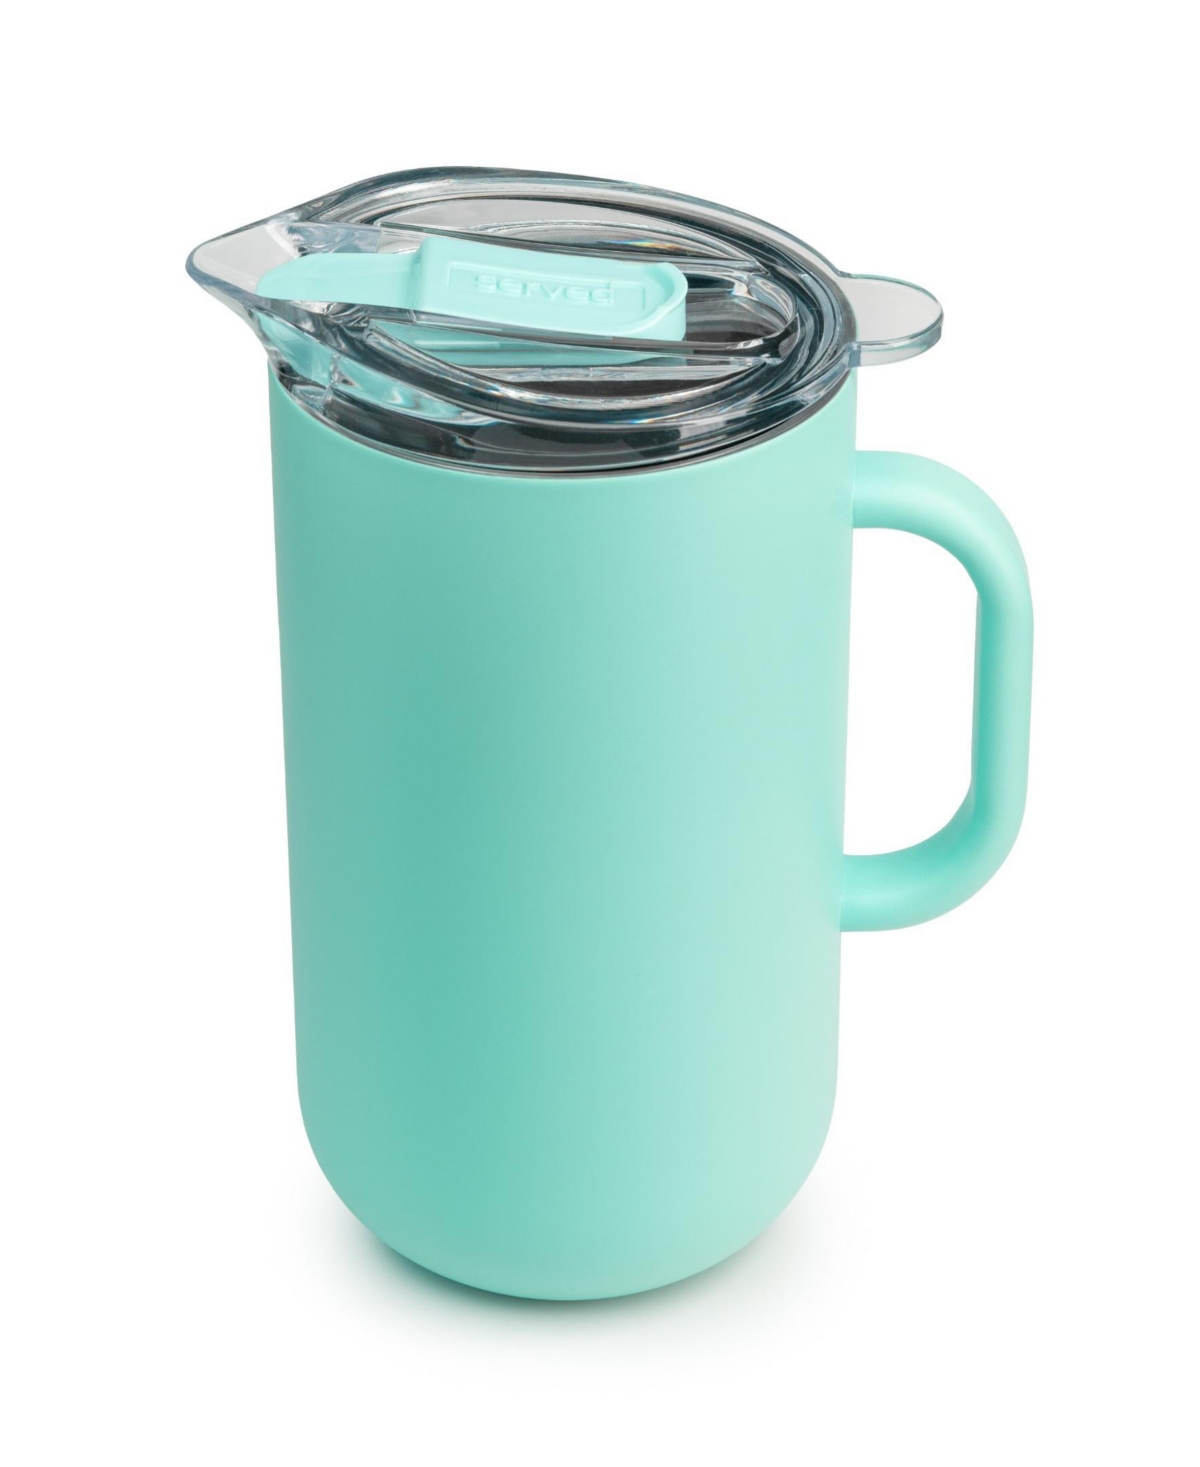 Served Vacuum-insulated Double-walled Copper-lined Stainless Steel Pitcher, 2 Liter In Blue Lemonade